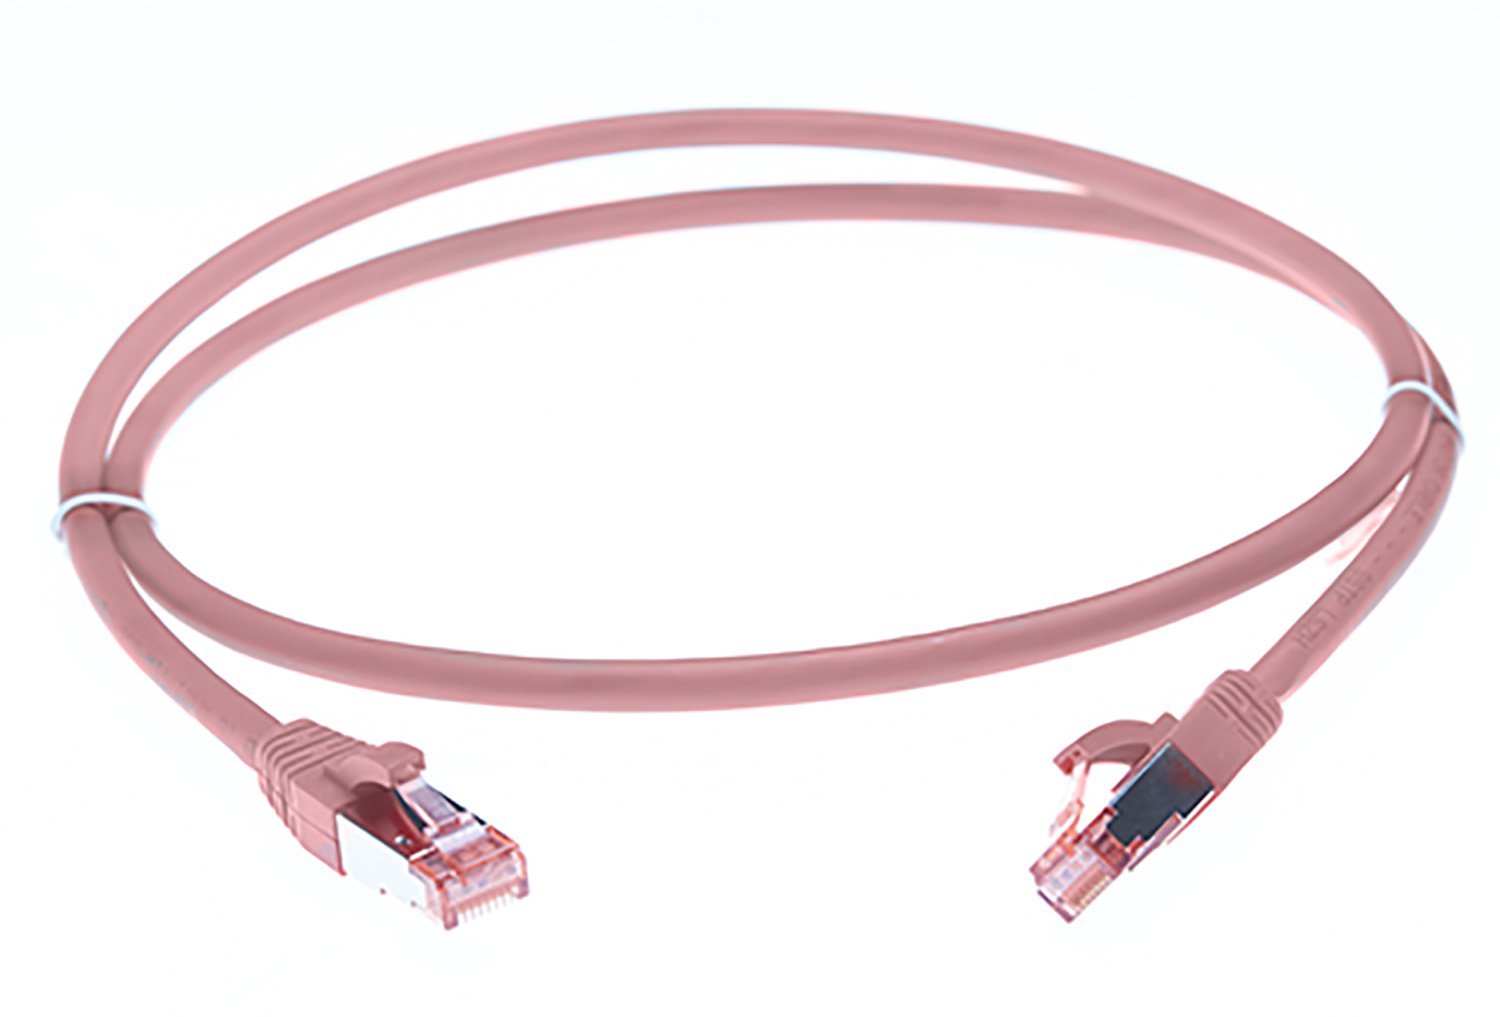 4Cabling 2M Cat 6A S/FTP Ethernet Network Cable: Pink